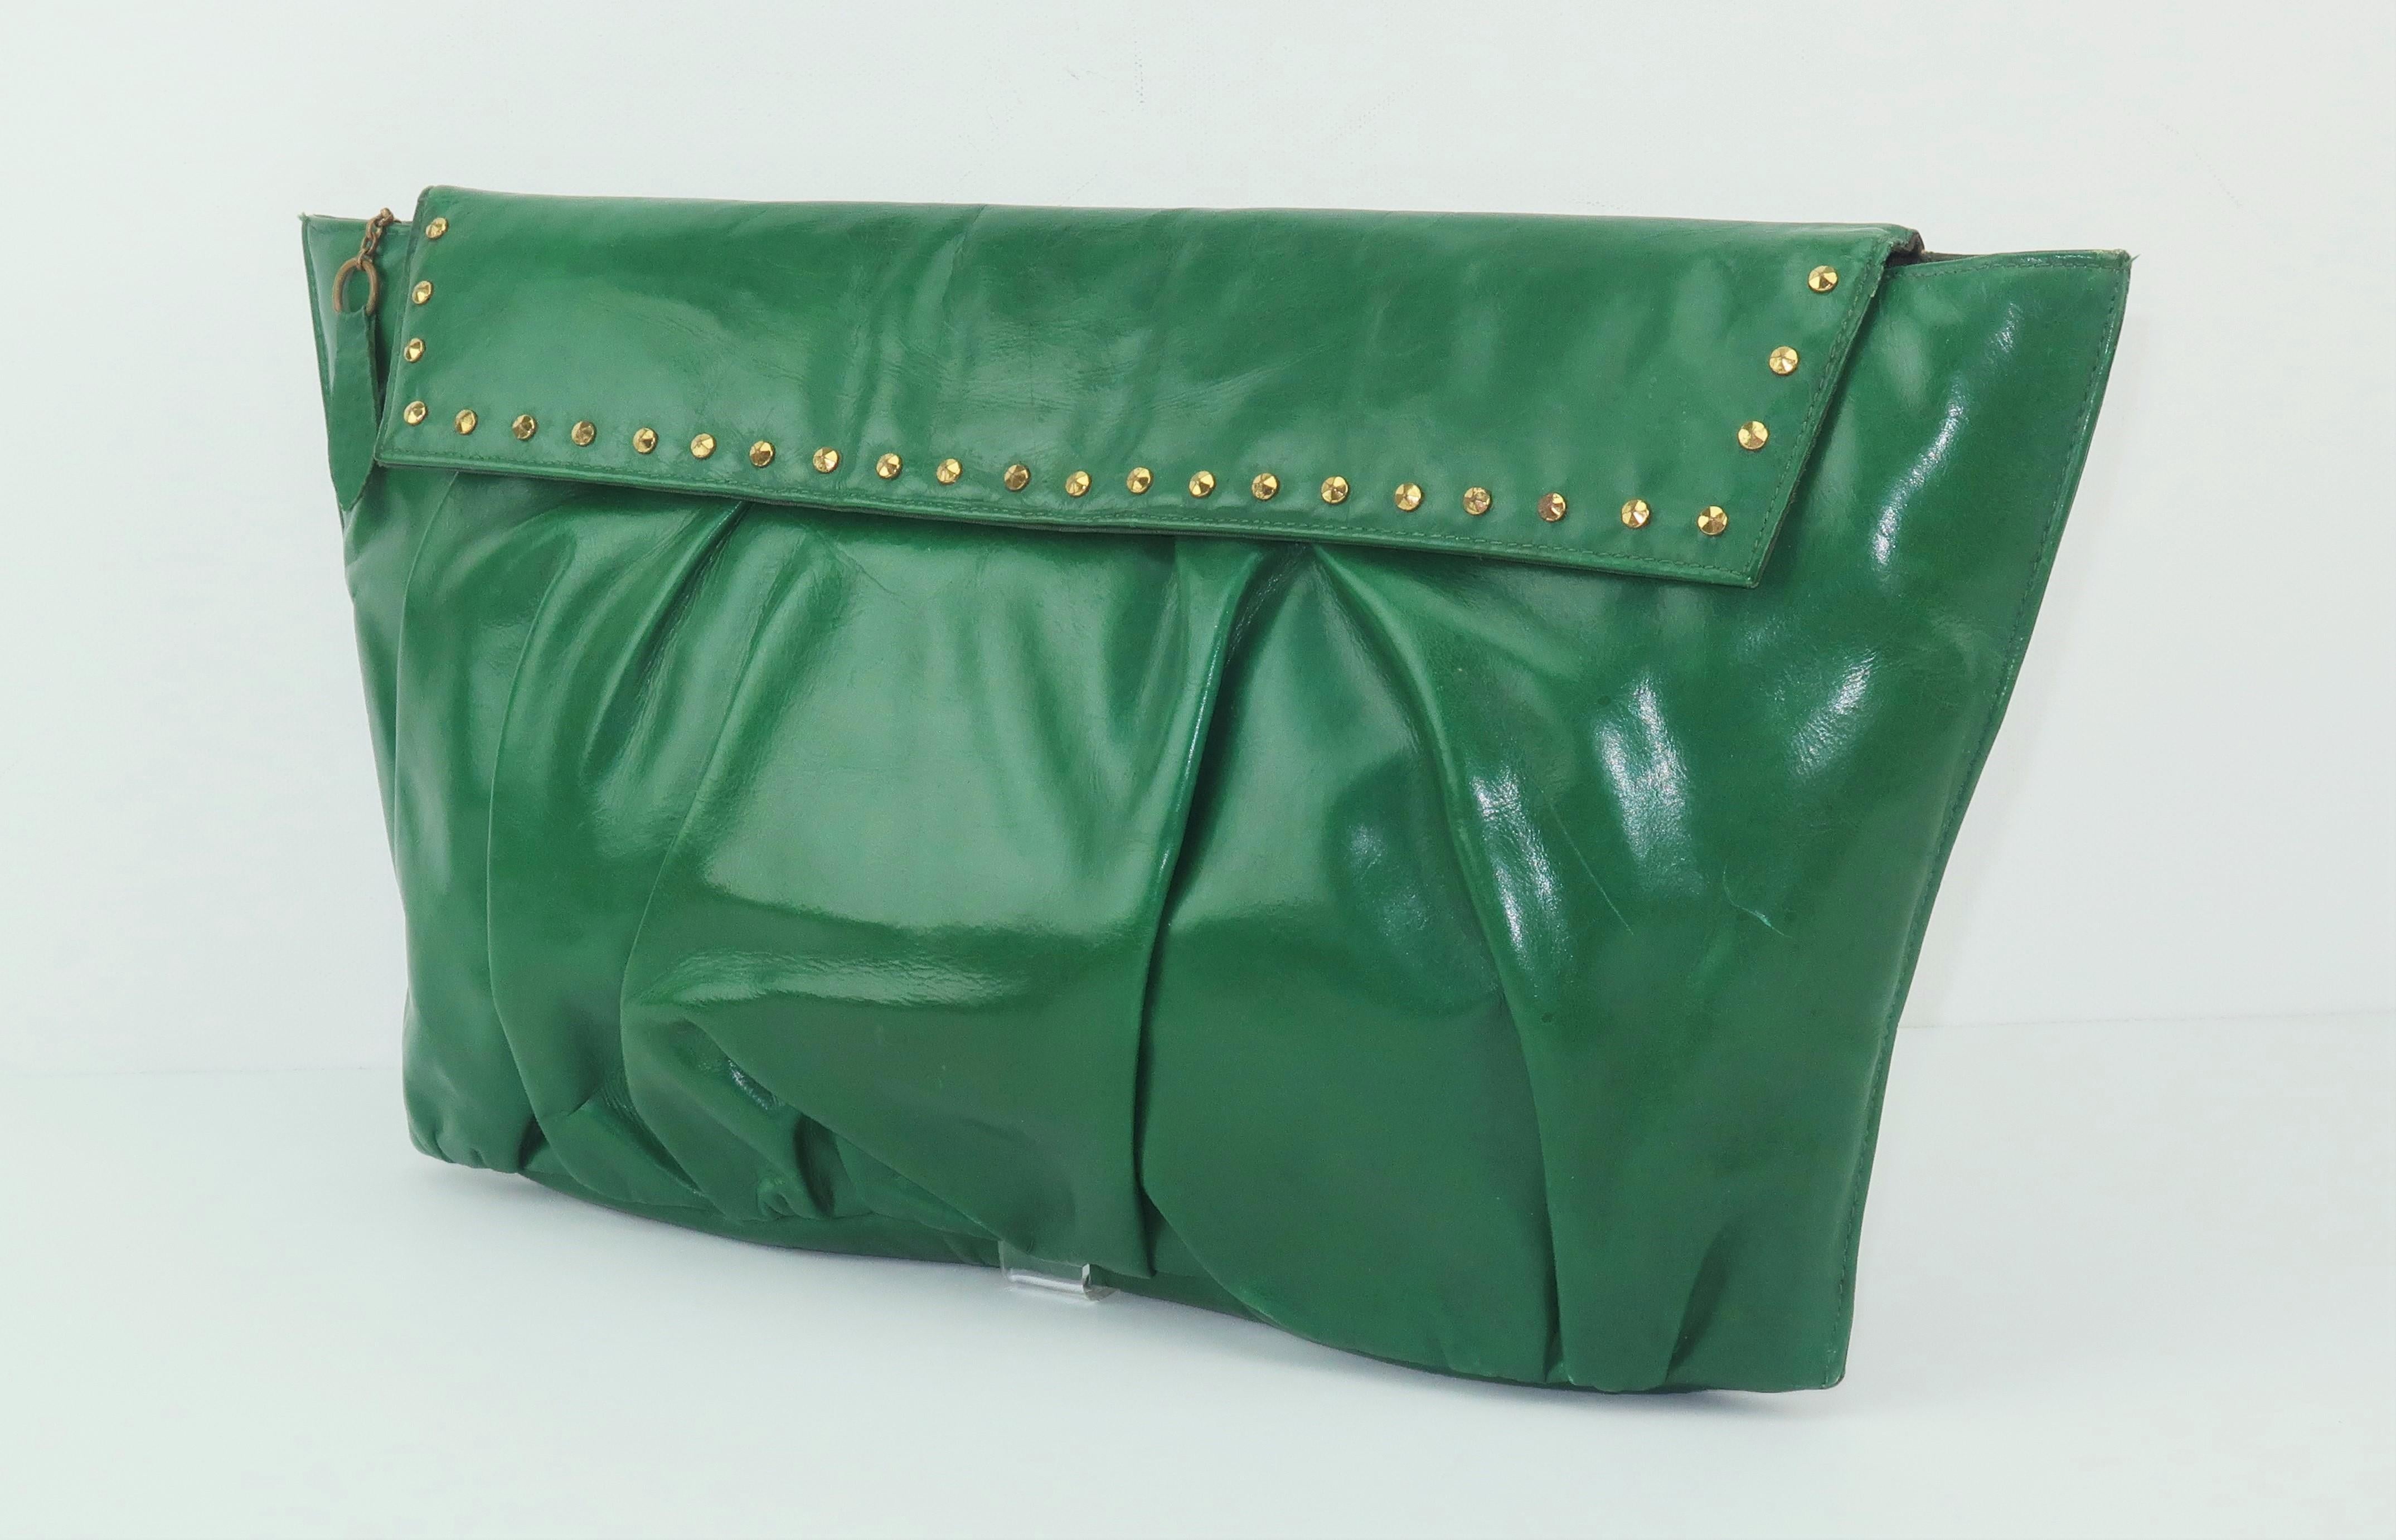 This 1940’s emerald green leather handbag has a fashion forward look with brass faceted stud accents that are as stylish today as in the past.  The trapezoidal silhouette and ruched leather body are eye catching details and the manageable size is